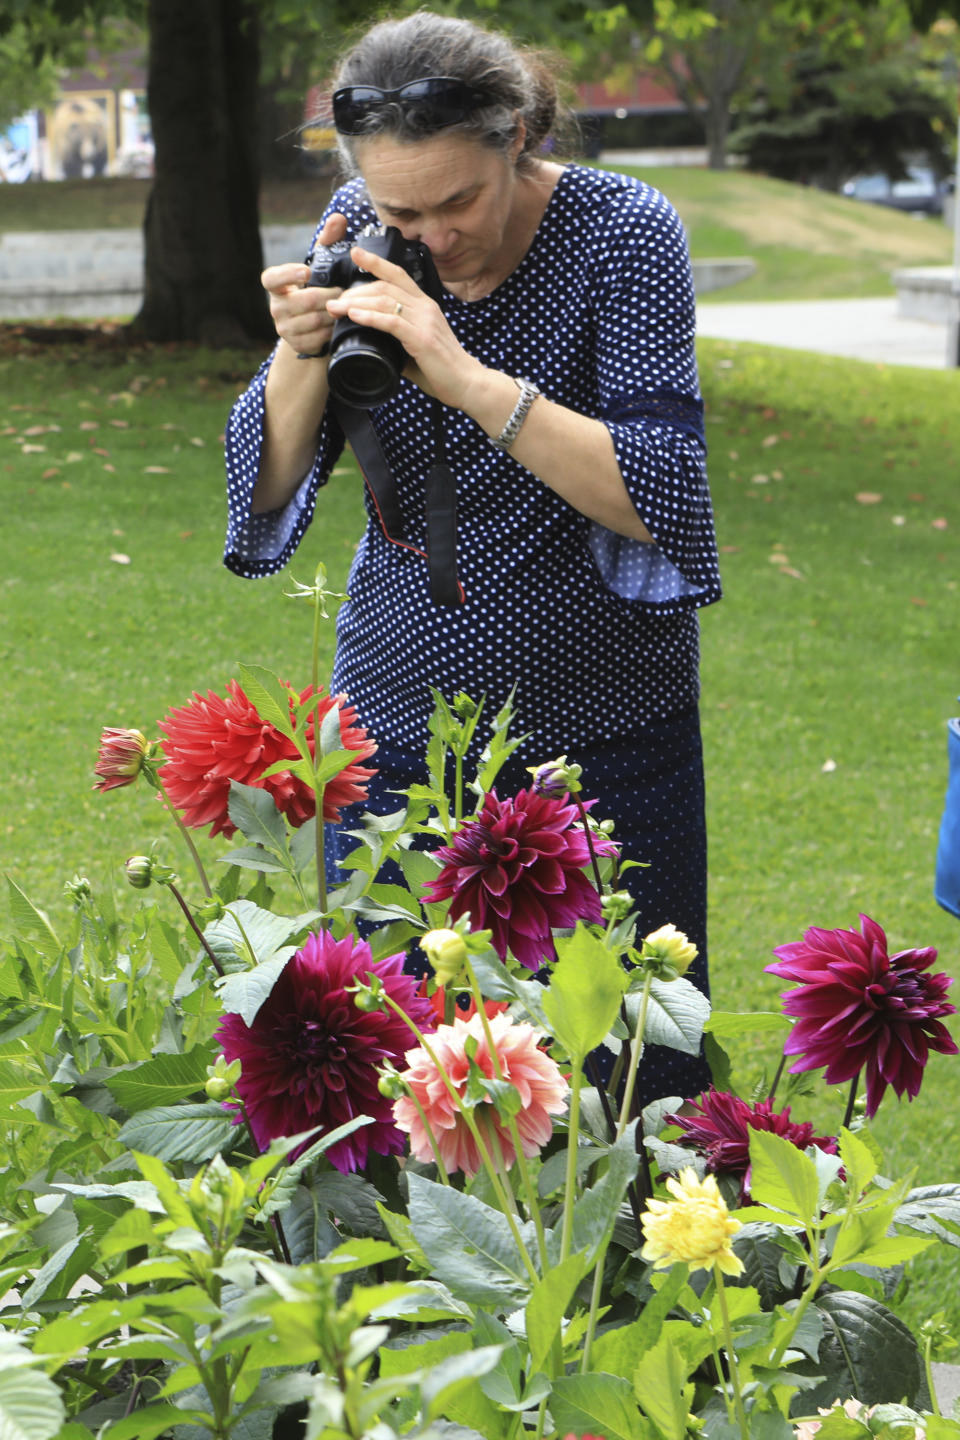 Denise Armitage of Toowoomba, Queensland, Australia, photographs dahlias at gardens in Town Square in Anchorage, Alaska, Thursday, Aug. 15, 2019. Alaska recorded its warmest month ever in July and hot, dry weather has continued in Anchorage and much of the region south of the Alaska Range. (AP Photo/Dan Joling)